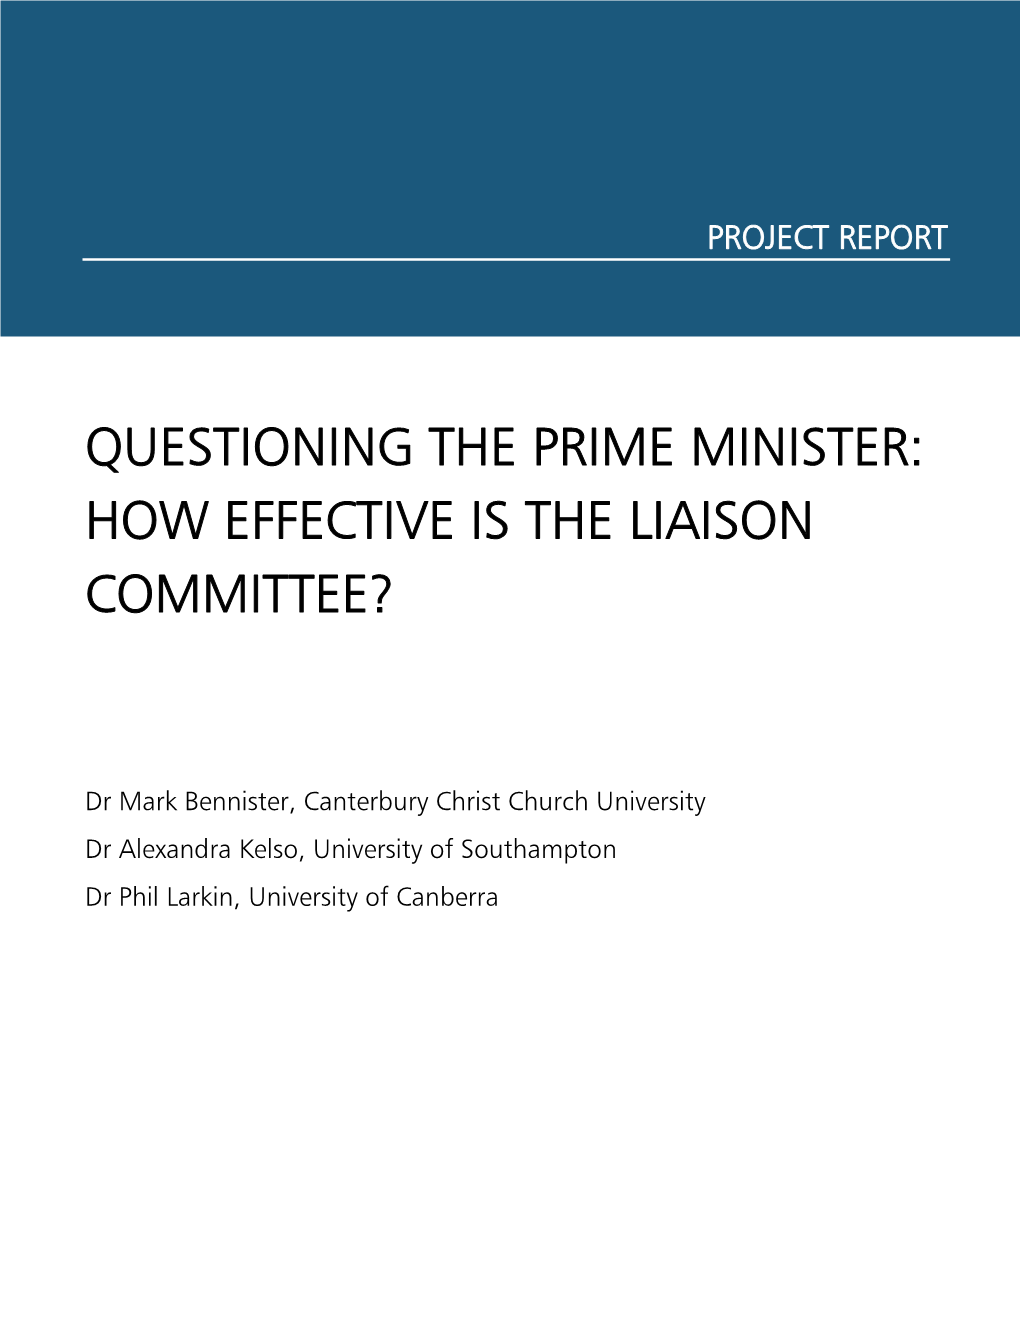 Questioning the Prime Minister: How Effective Is the Liaison Committee?